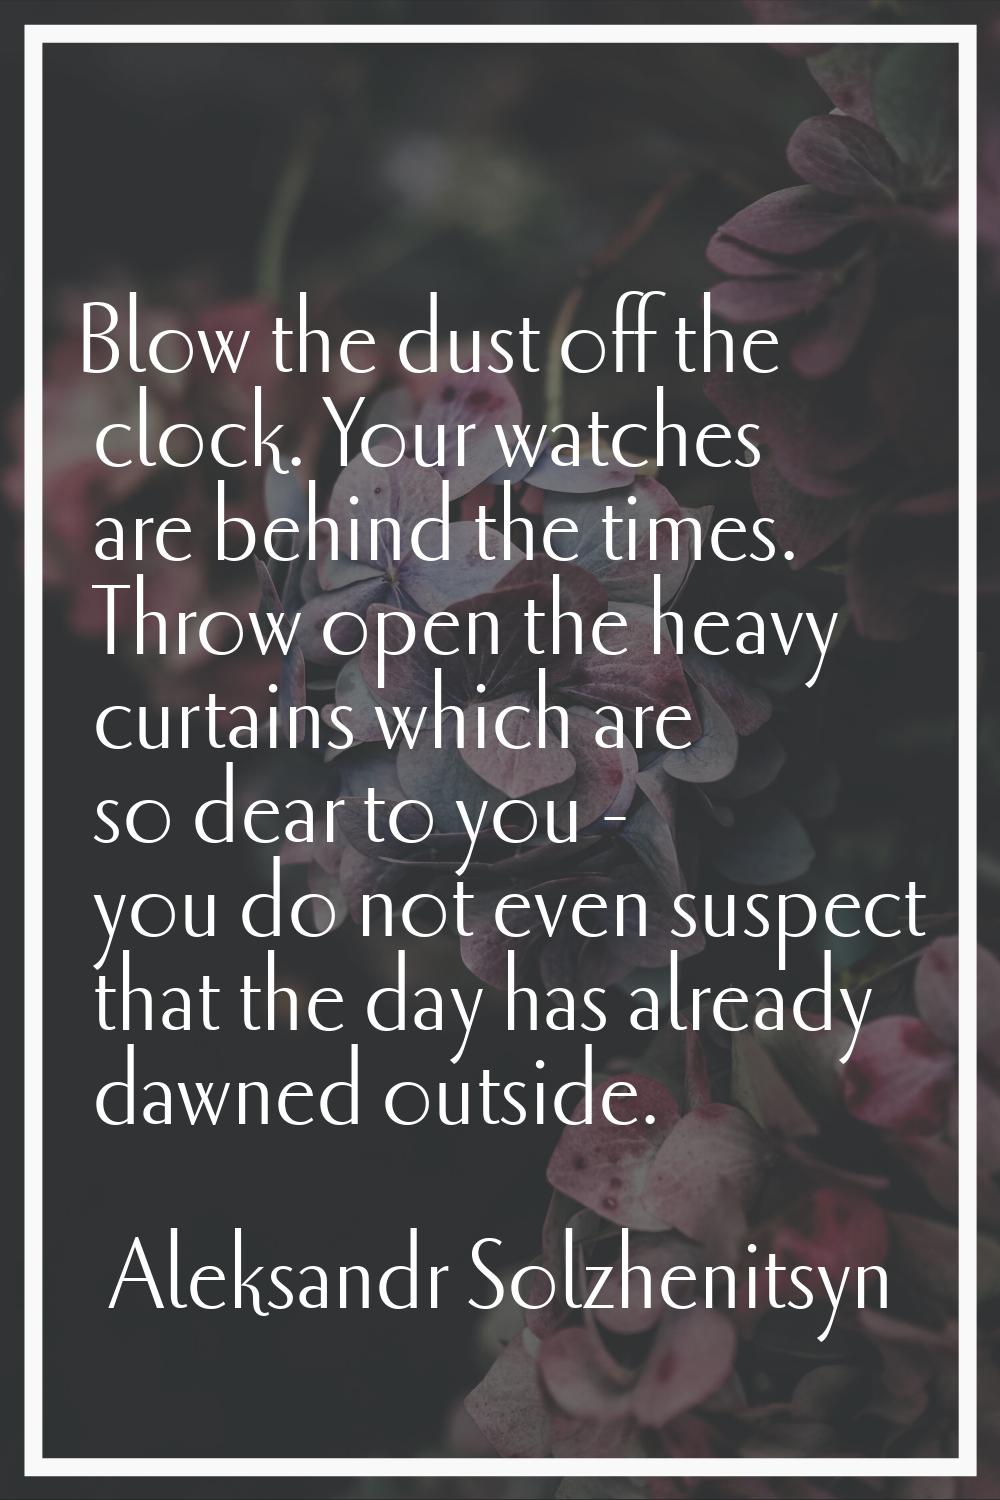 Blow the dust off the clock. Your watches are behind the times. Throw open the heavy curtains which